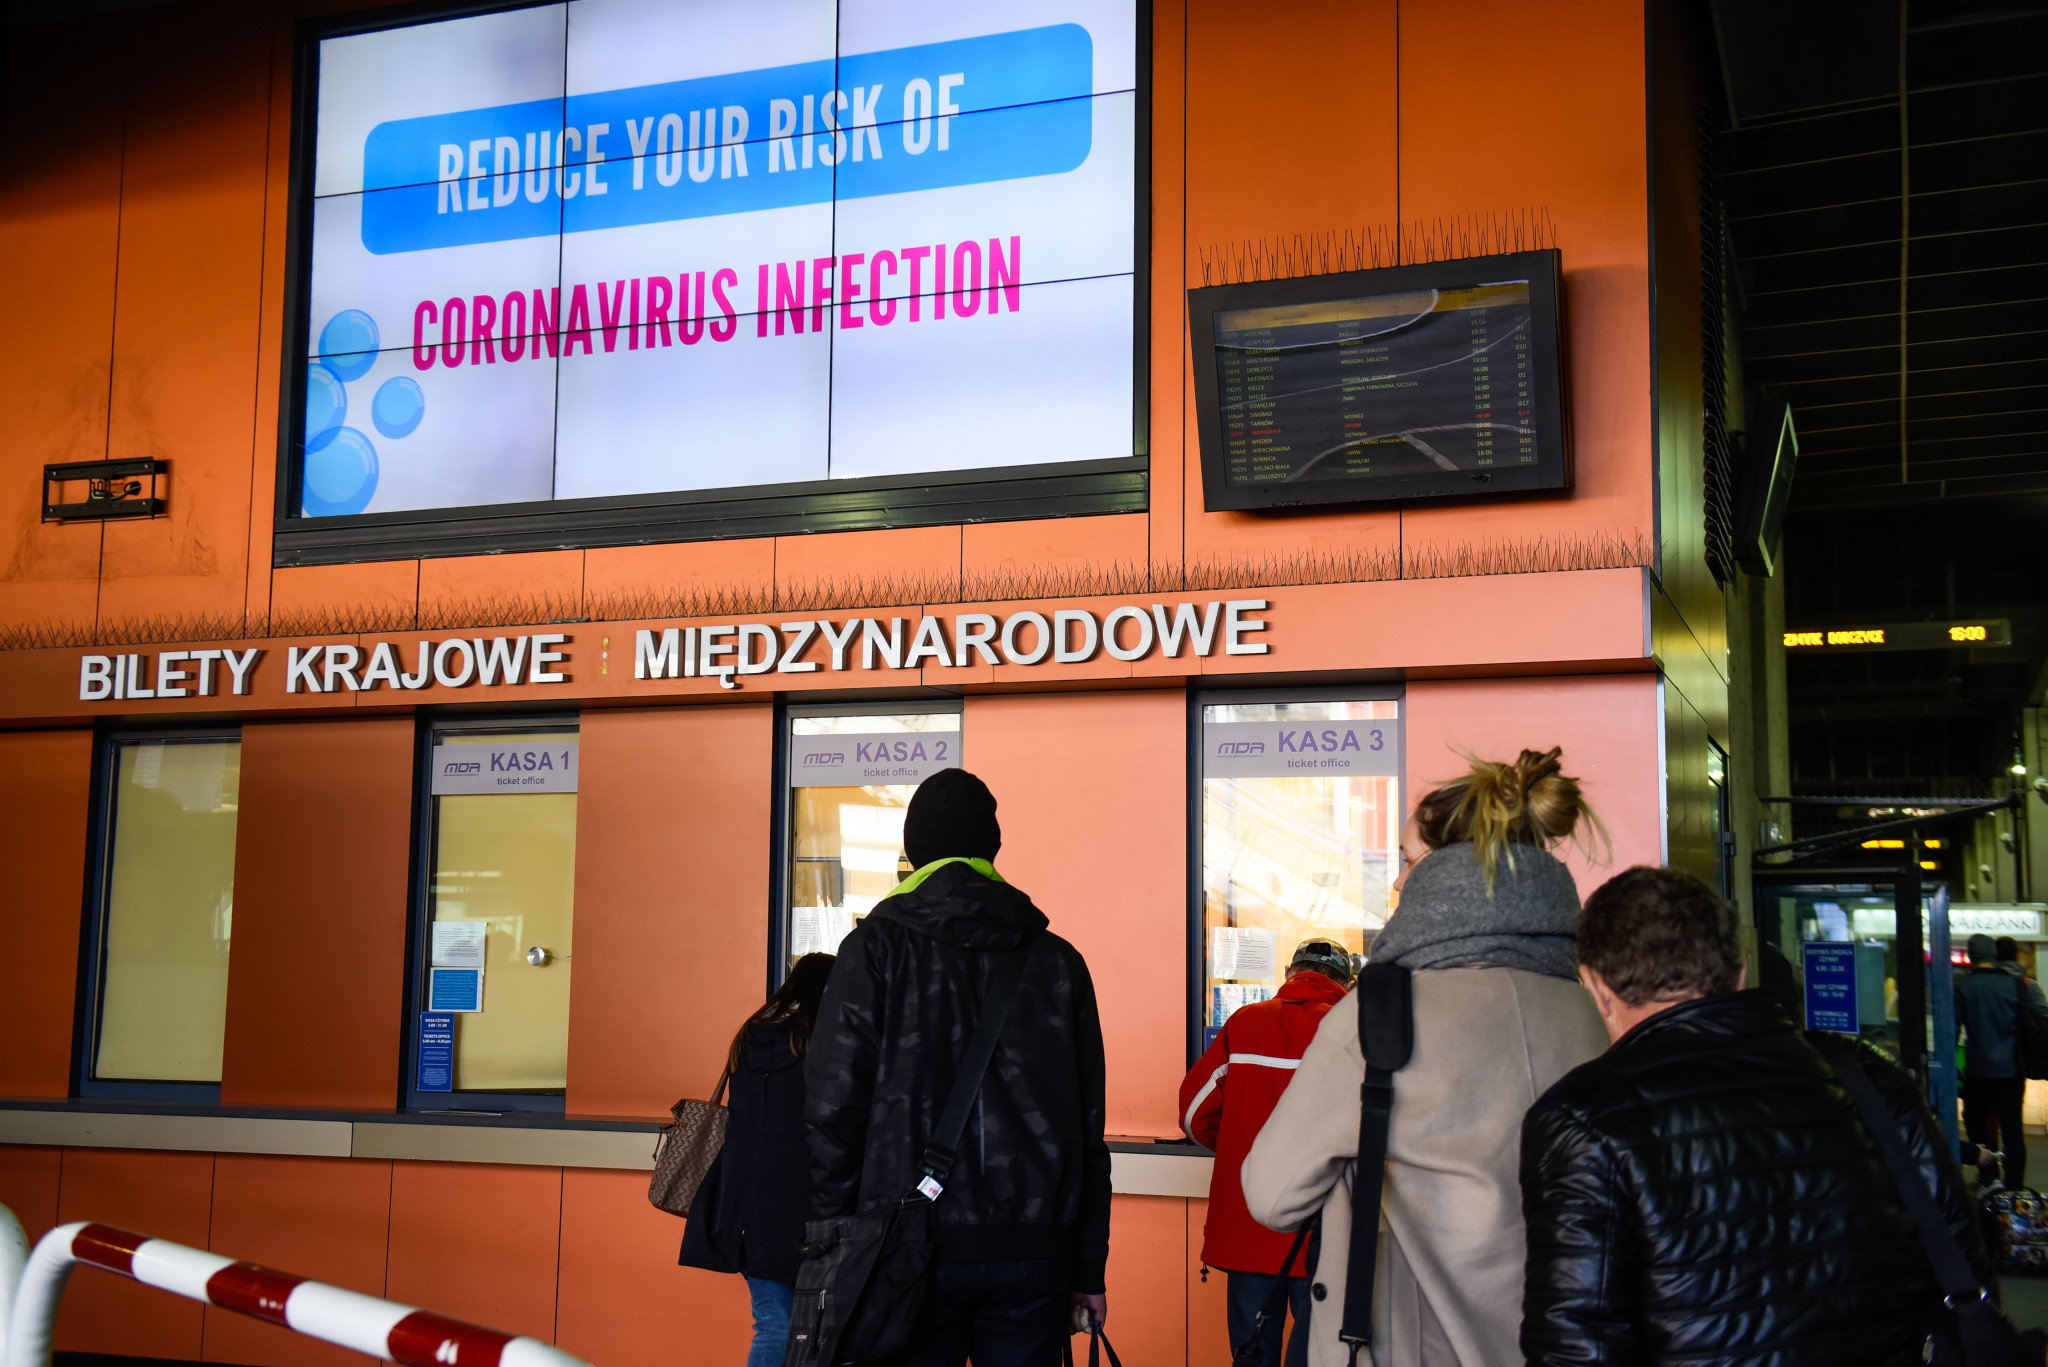 Measures have been put in place to stop the spread of coronavirus ©Getty Images